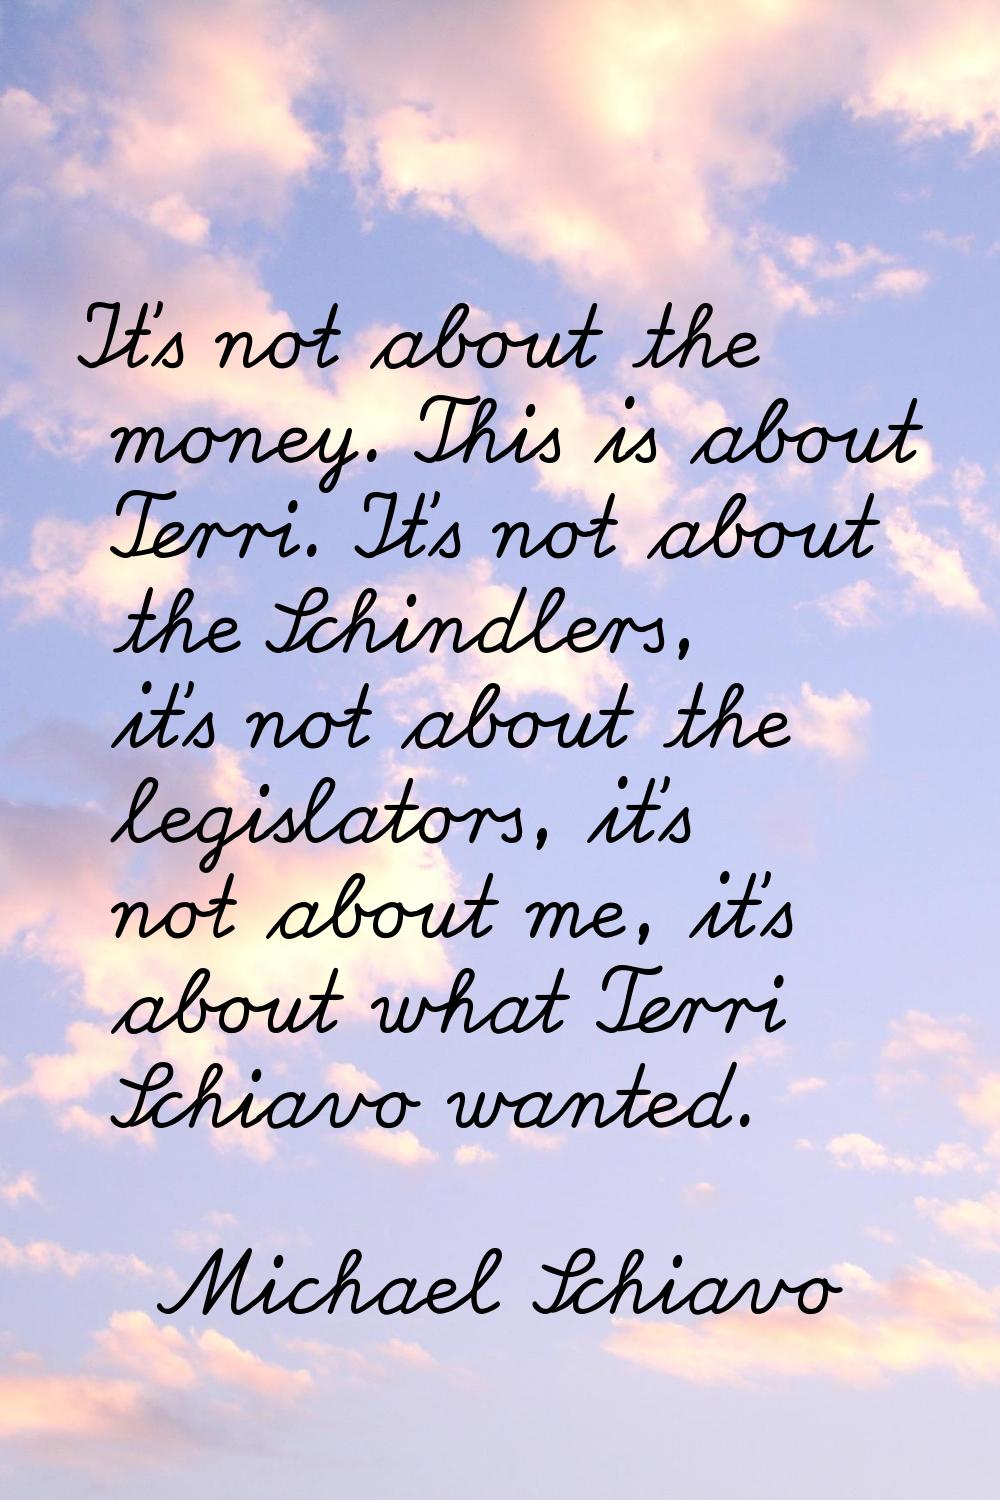 It's not about the money. This is about Terri. It's not about the Schindlers, it's not about the le